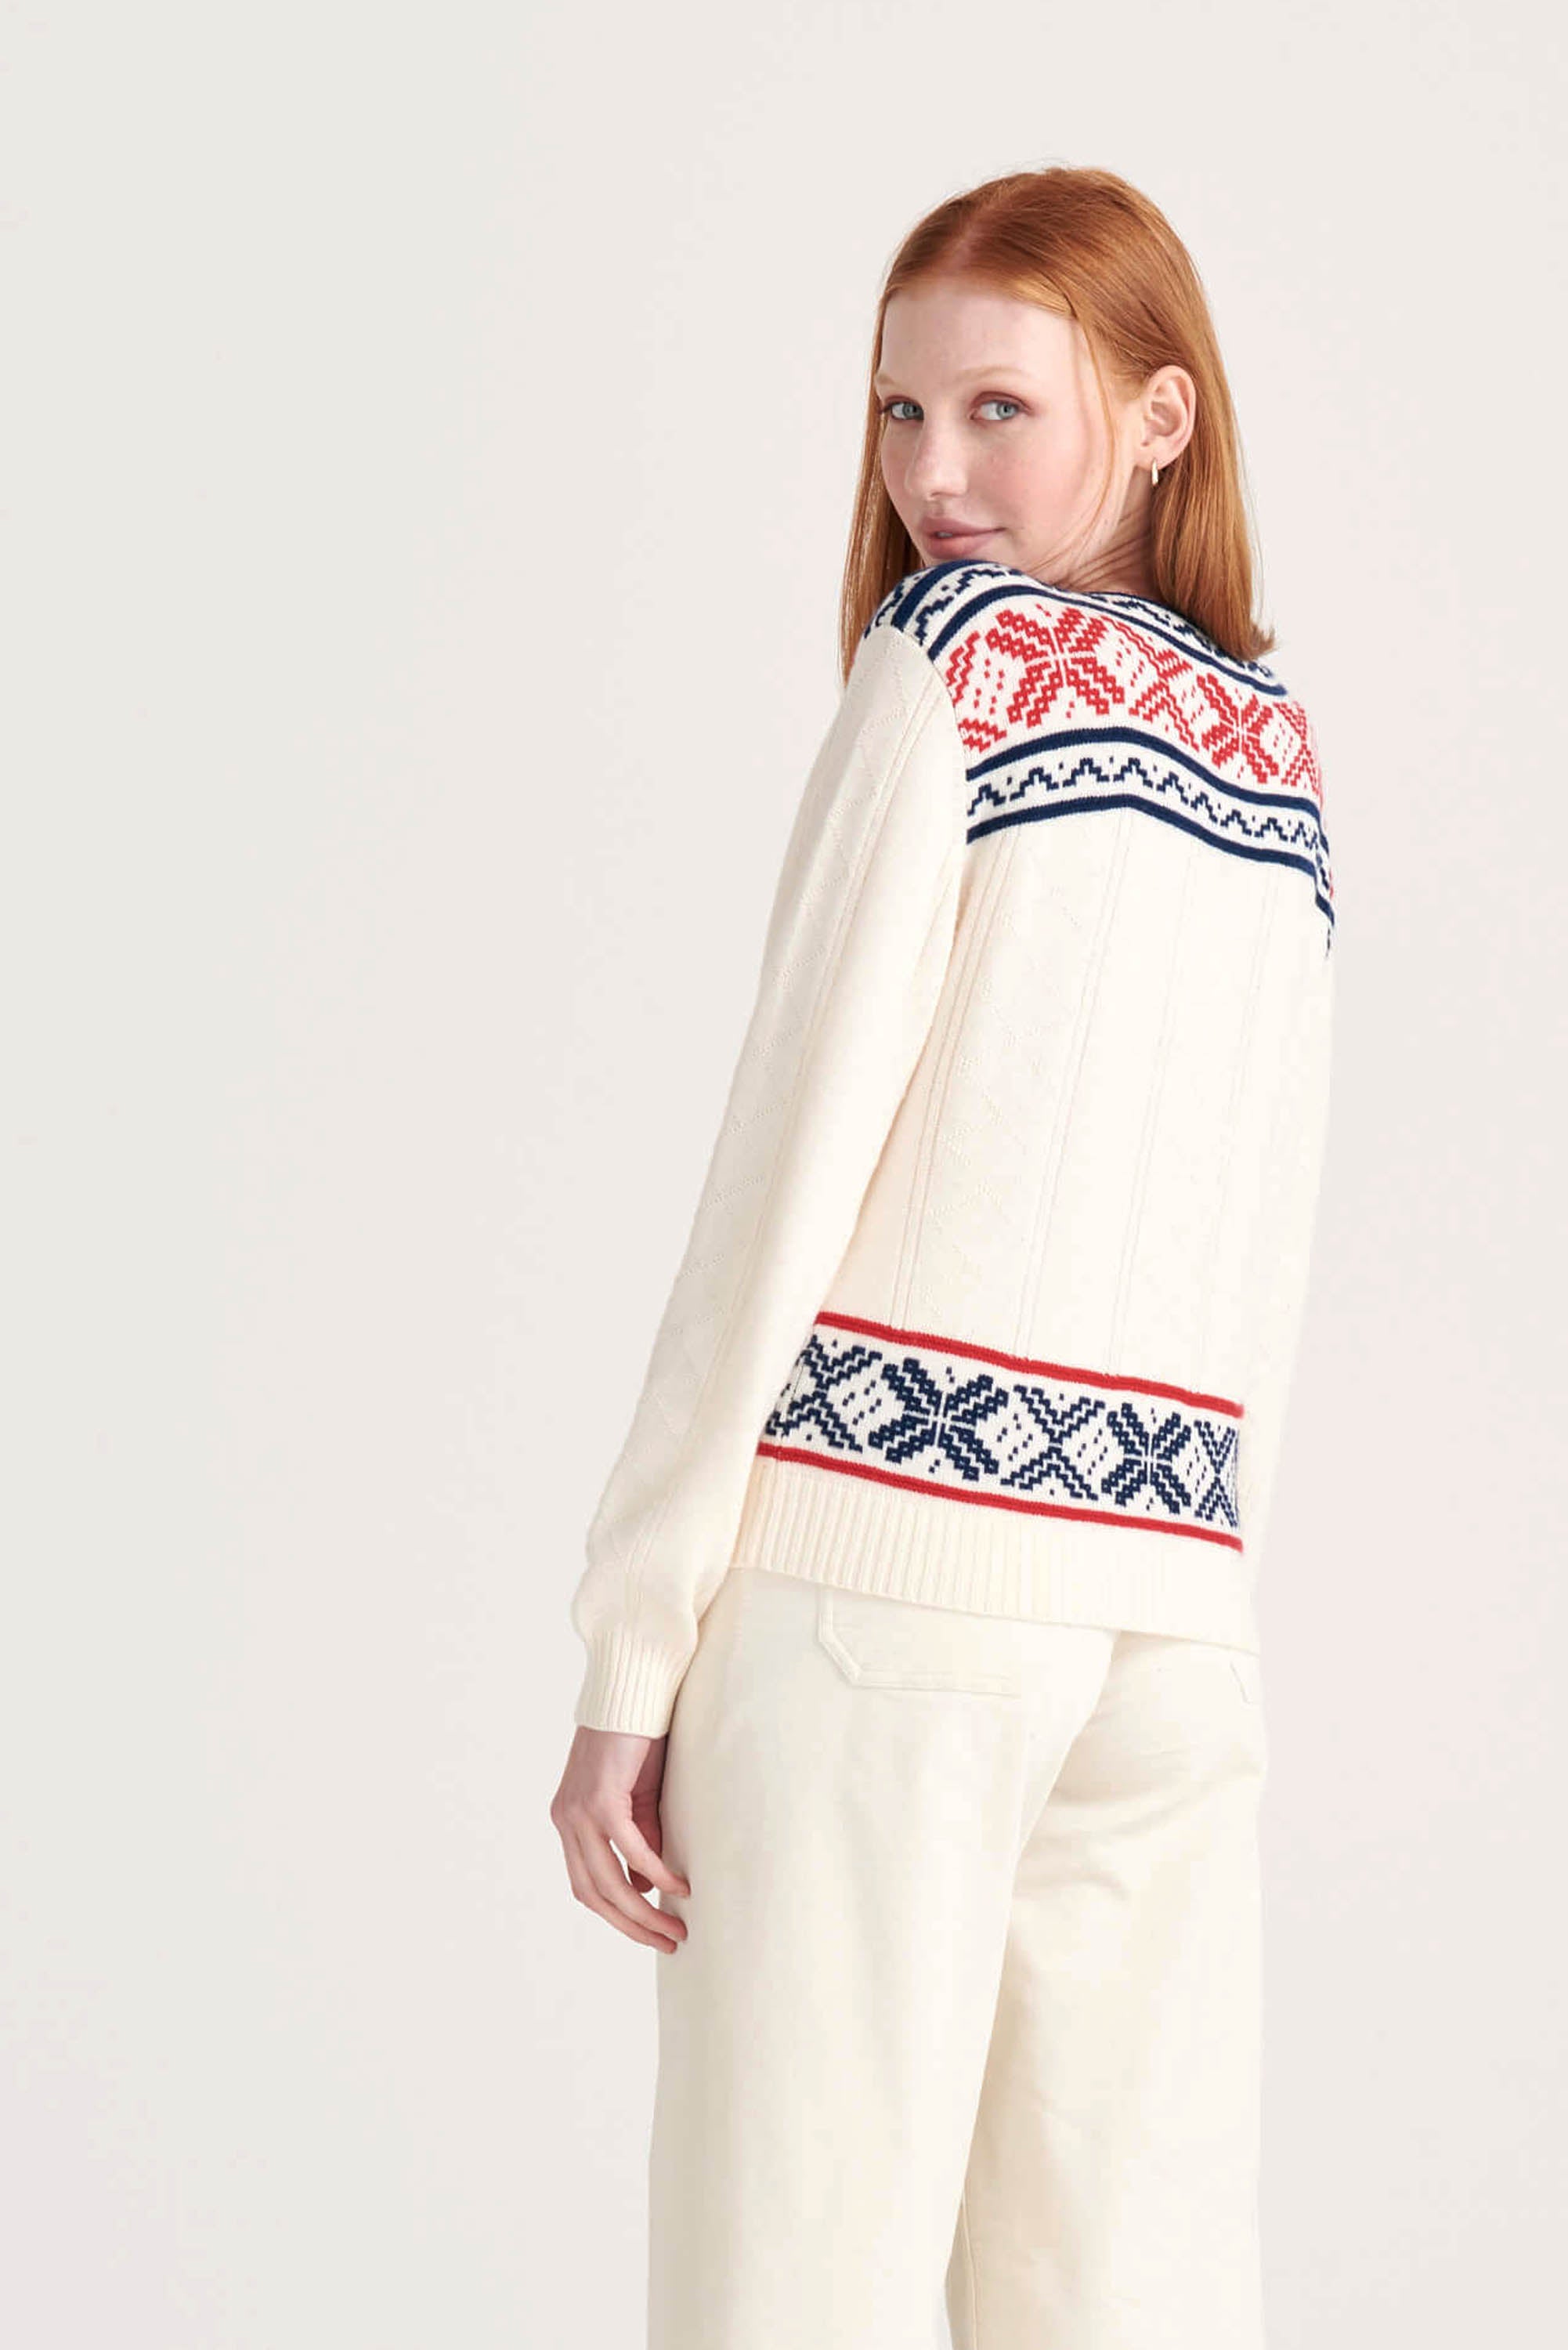 Ginger female model wearing Jumper1234 cream cashmere "greek guernsey" with navy and red hem and yolk detail facing away from the camera